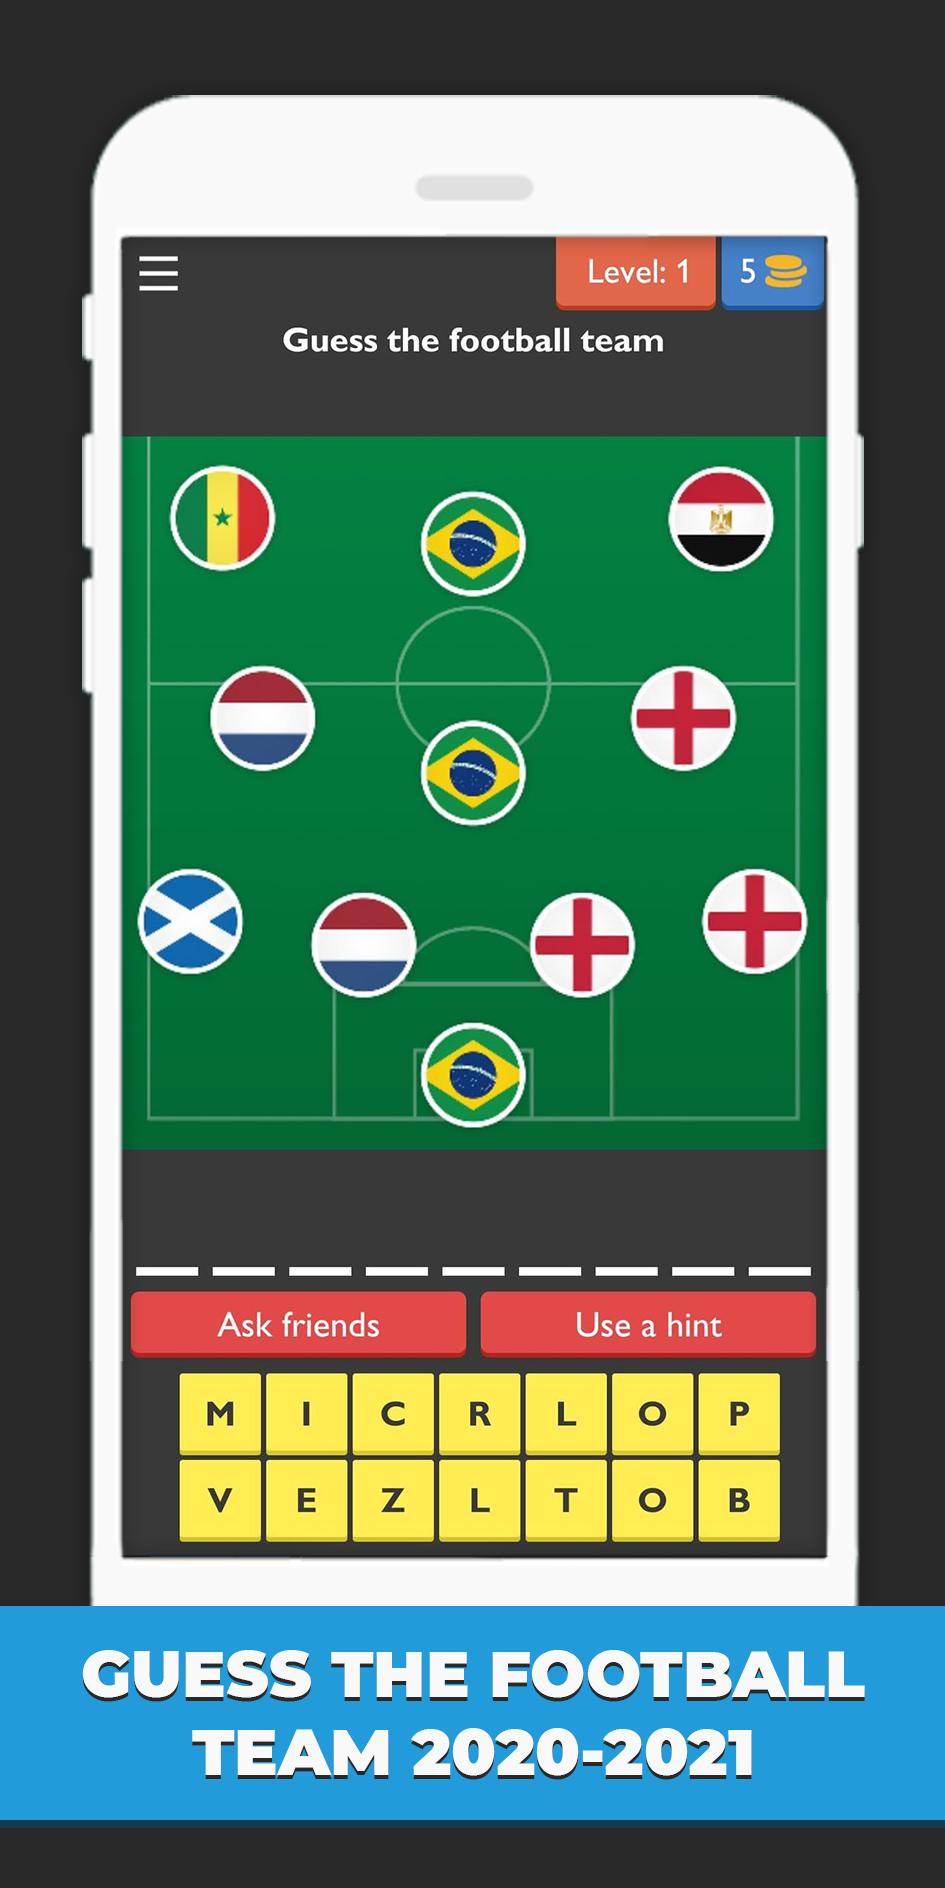 Ambient næve I virkeligheden Guess Football Team 2020-2021 - Football Quiz for Android - APK Download